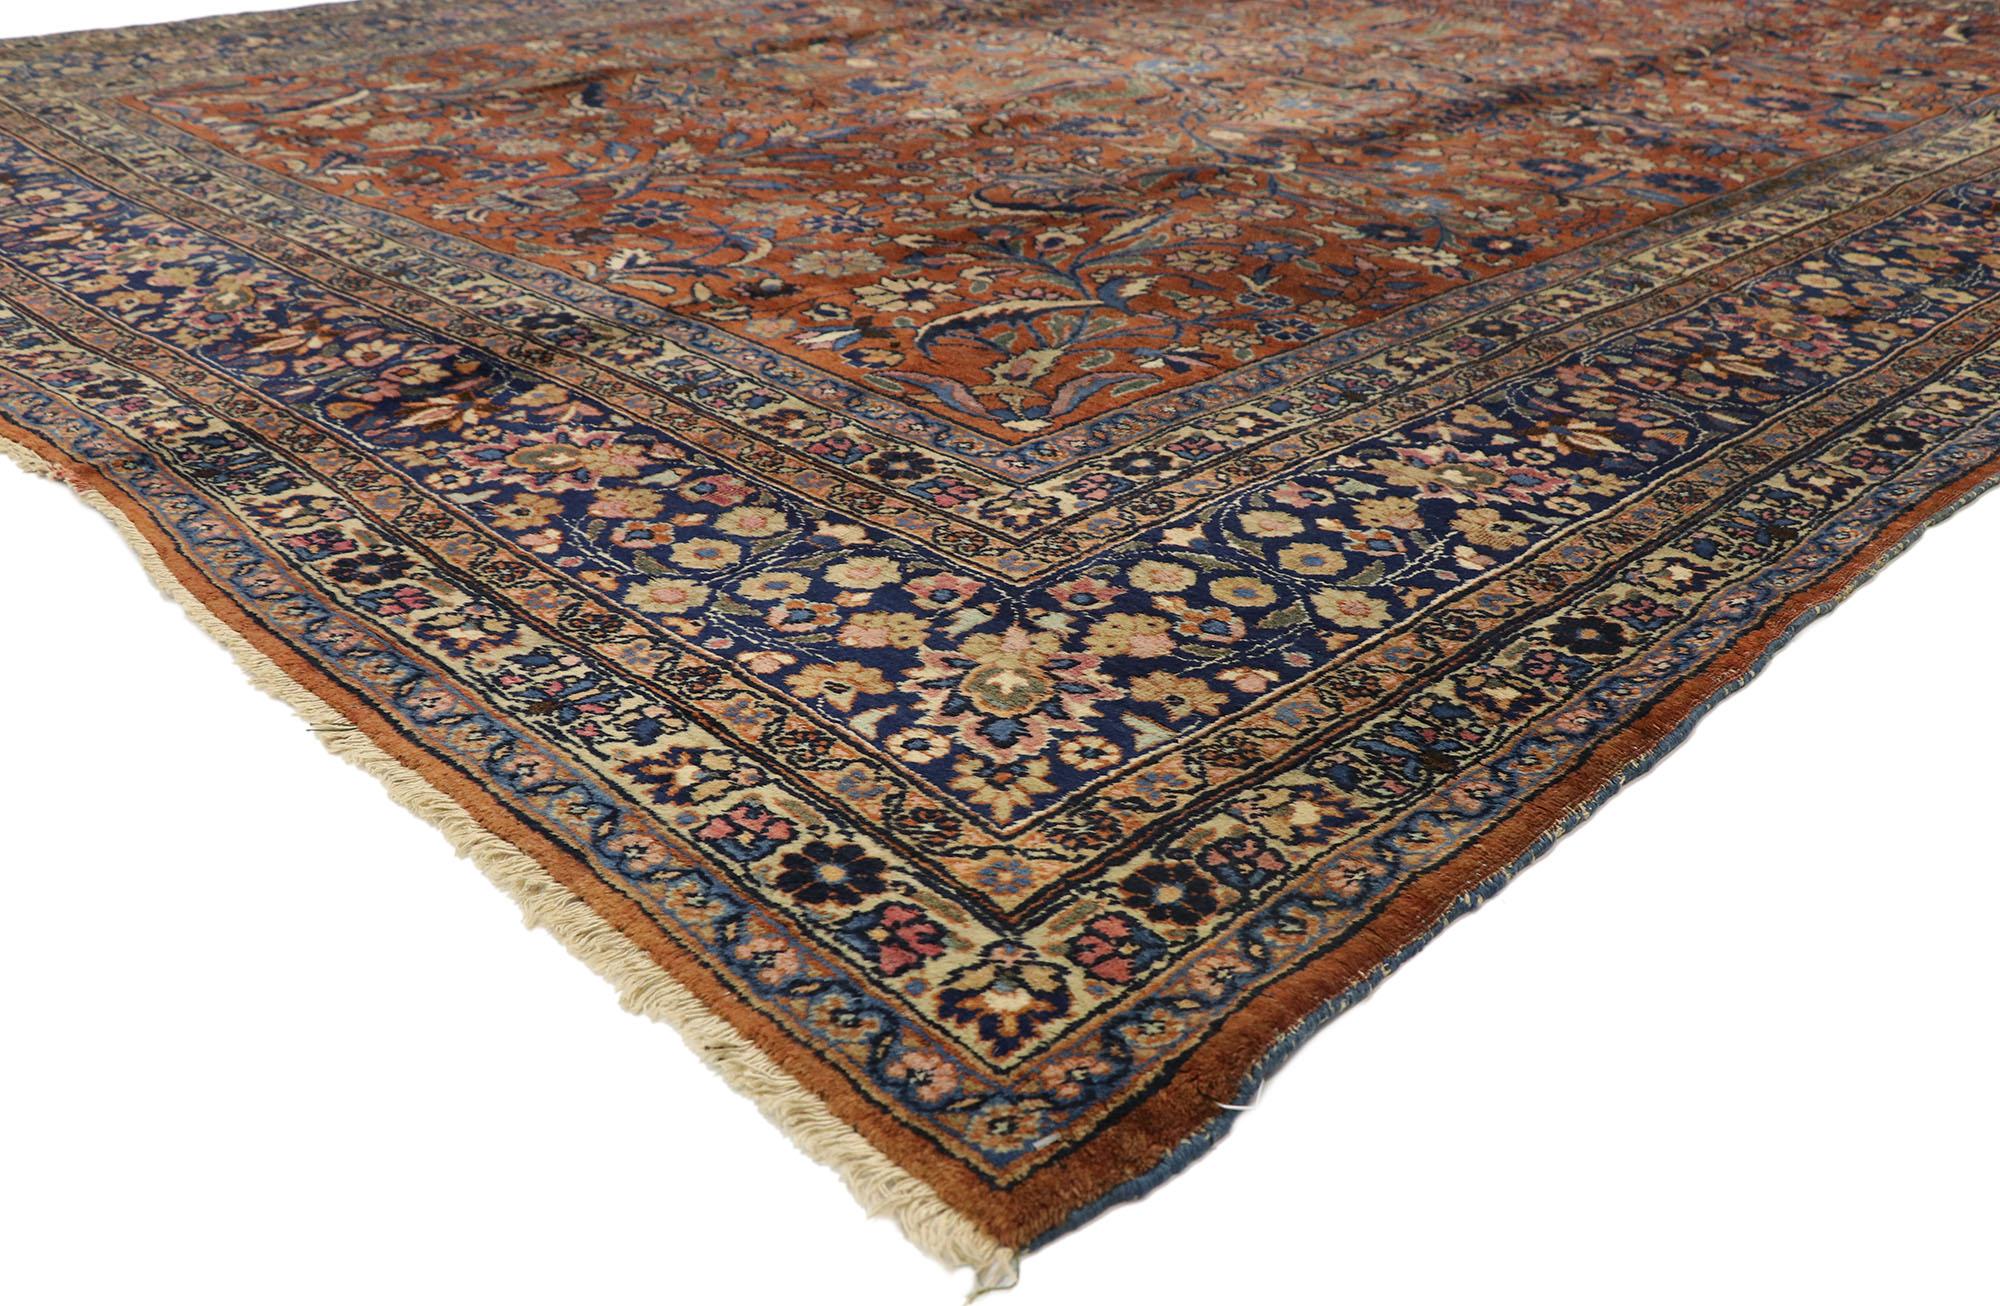 71212 antique Persian Mashhad rug with Traditional style 08'10 X 12'00 From Esmaili Rugs Collection. This hand-knotted wool antique Persian Mashhad rug with traditional style features an allover pattern on a warm rust colored field surrounded by a